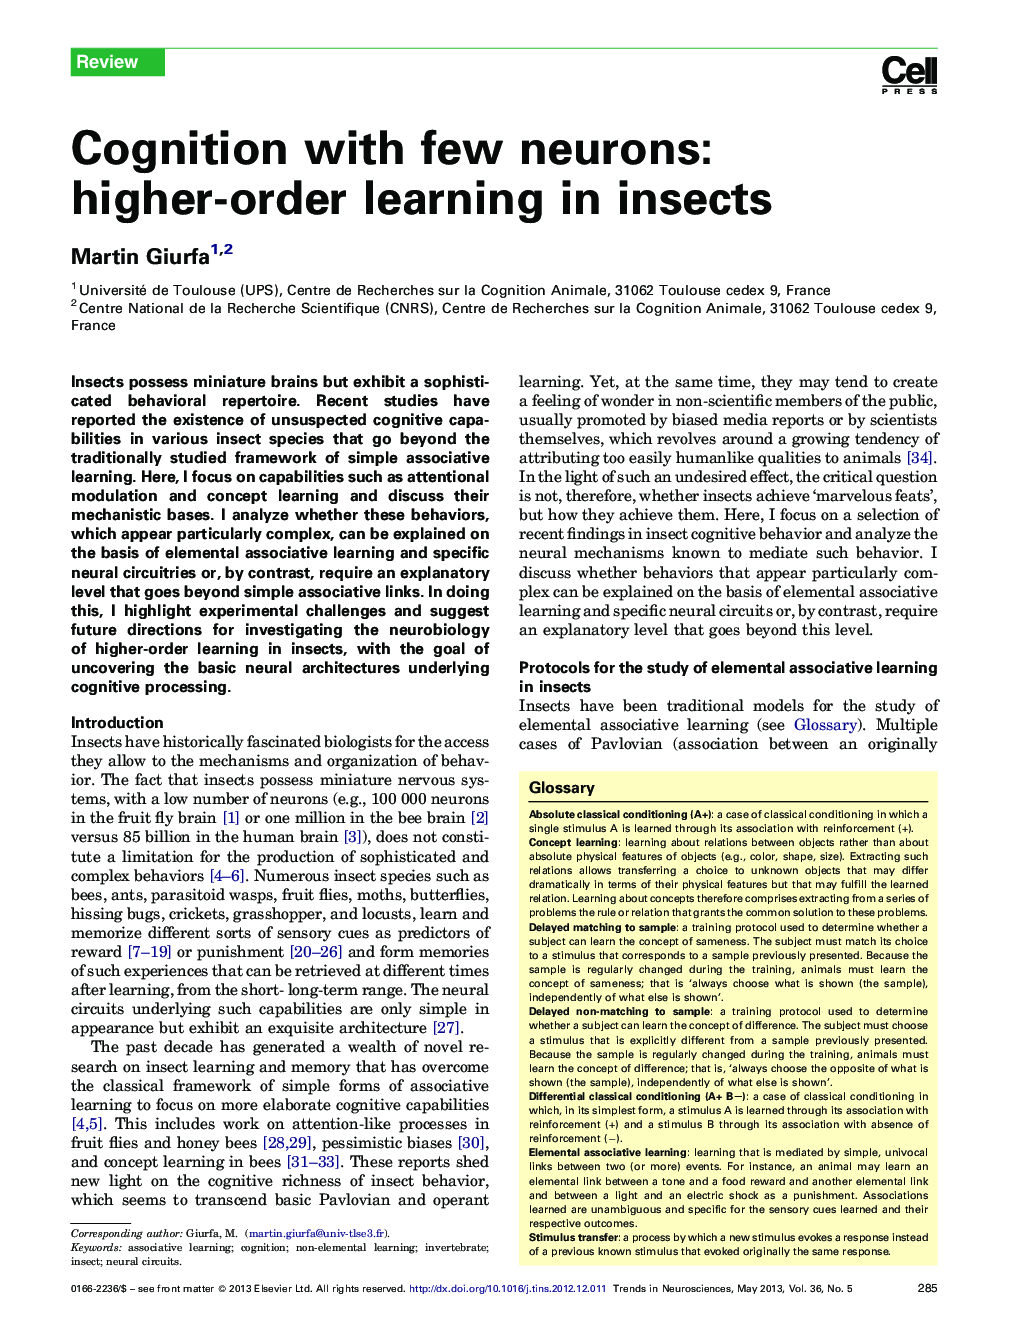 Cognition with few neurons: higher-order learning in insects